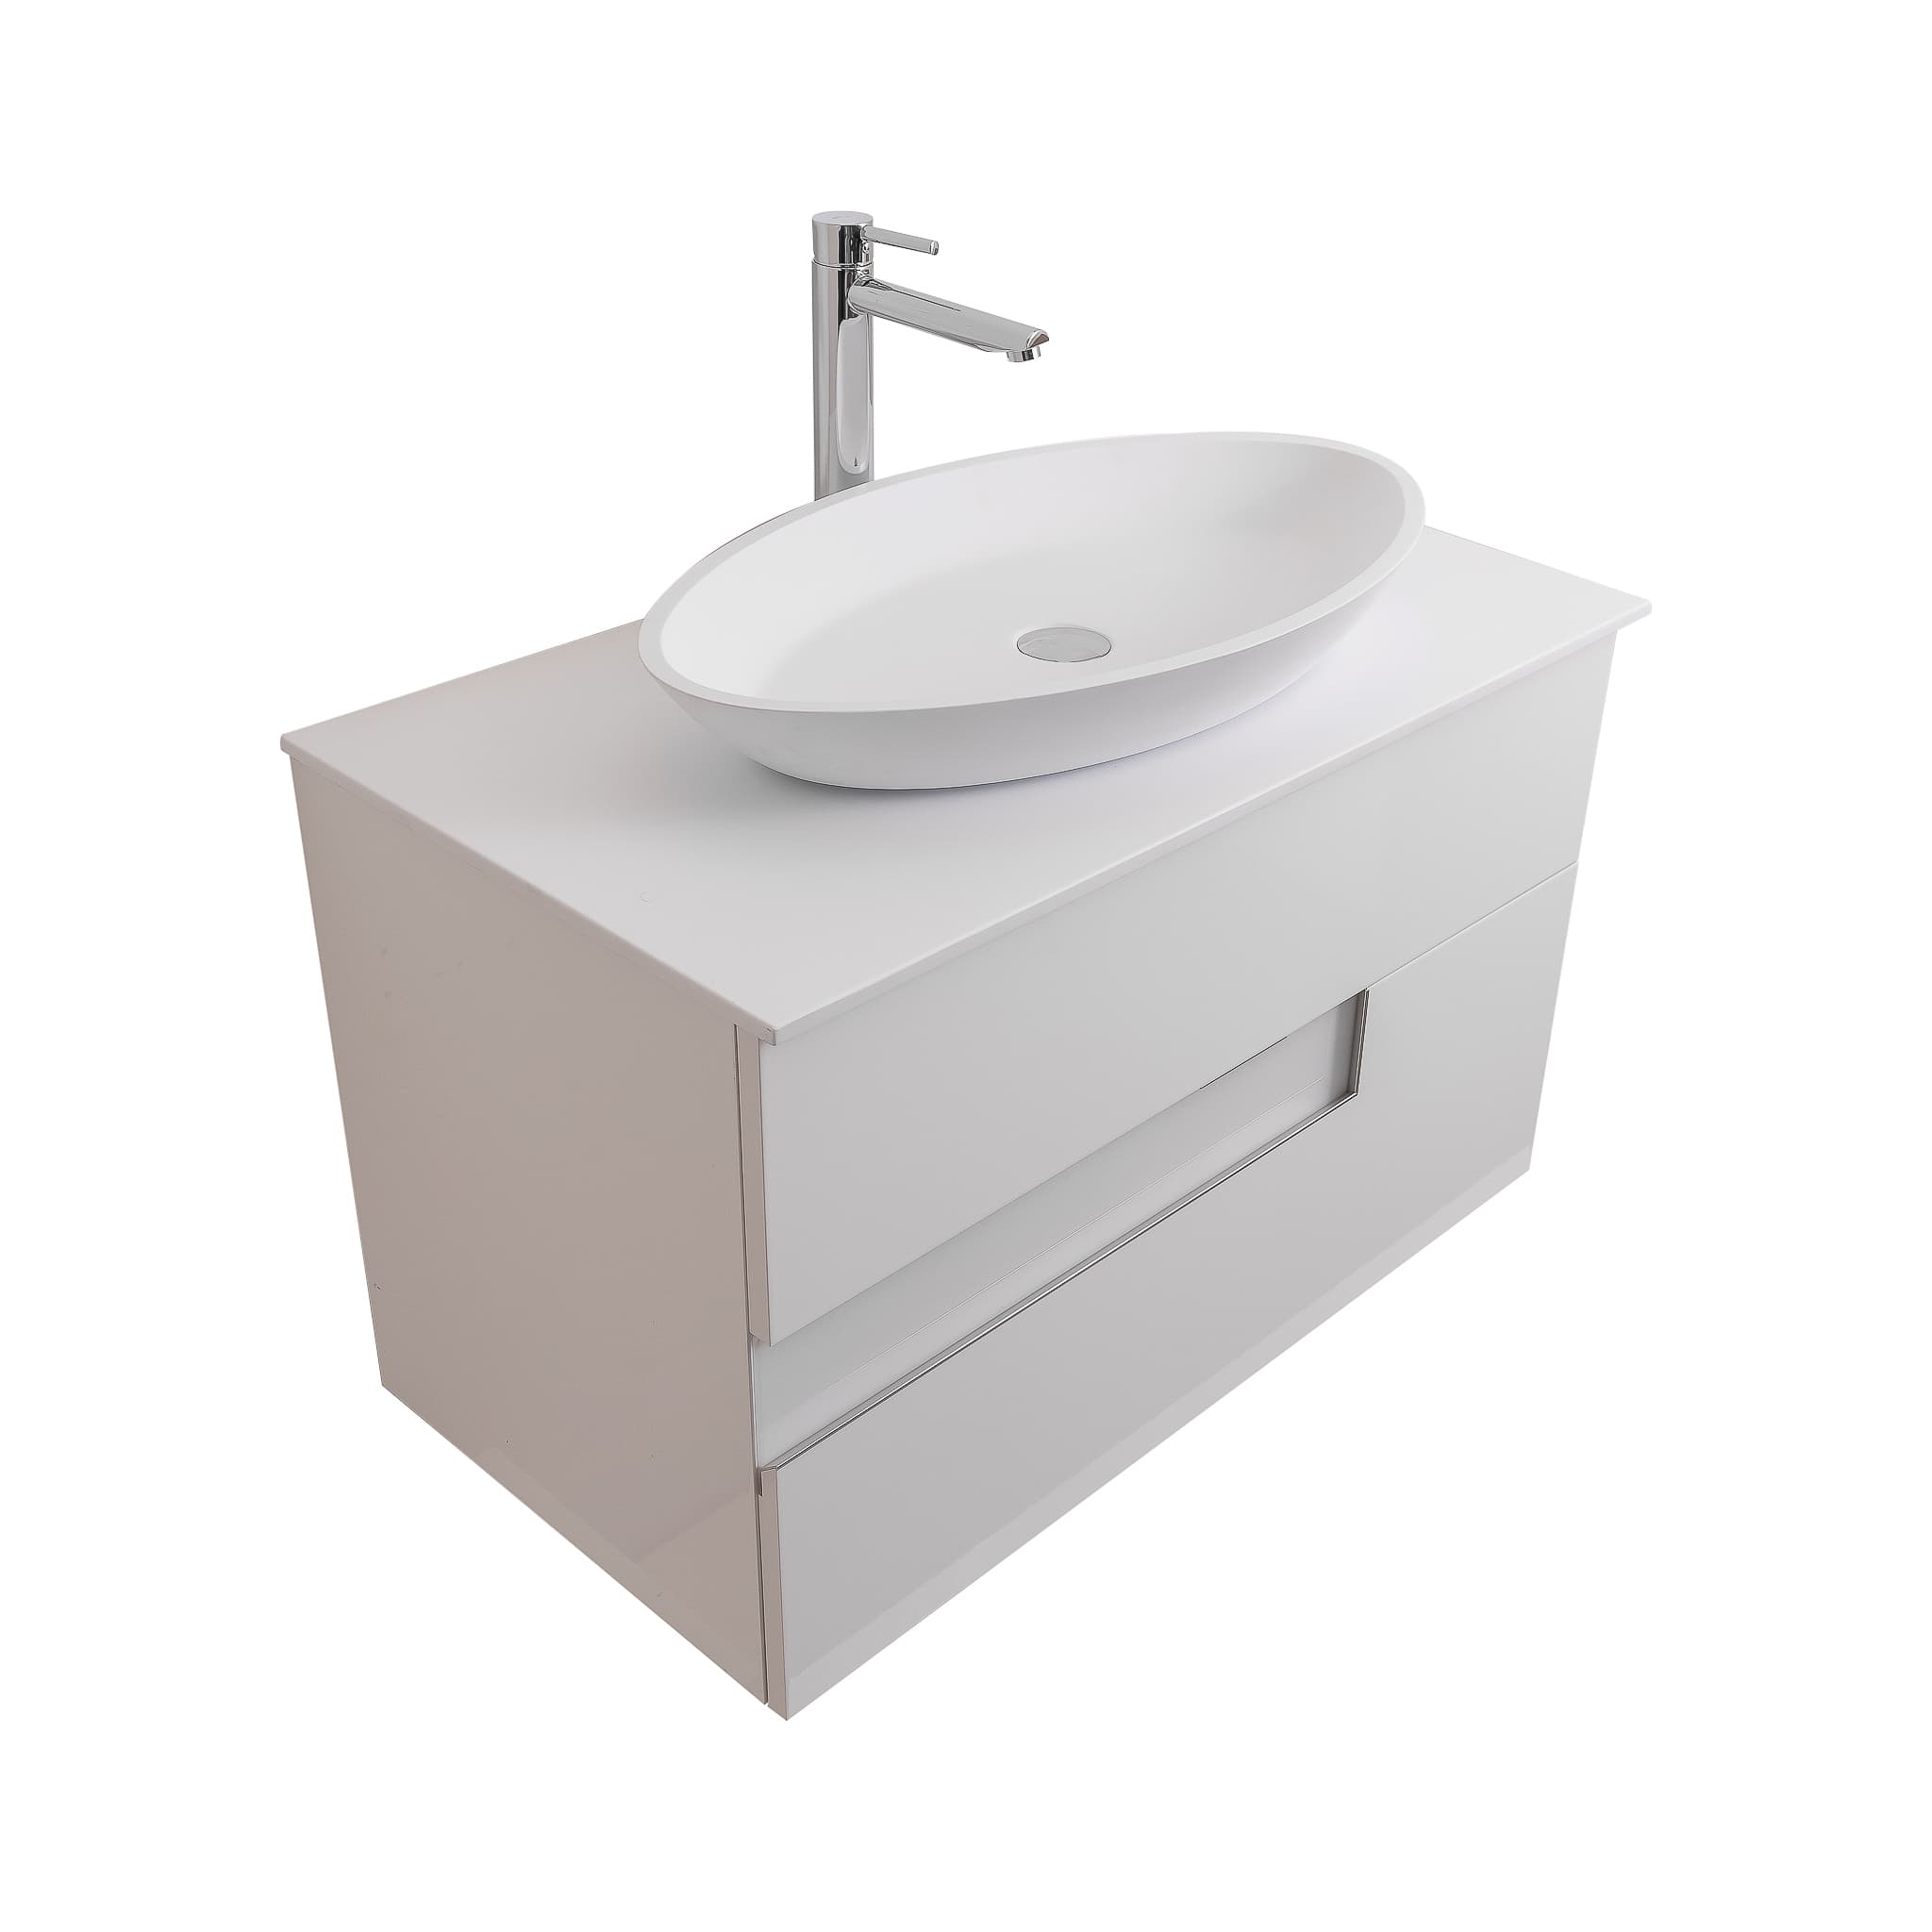 Vision 39.5 White High Gloss Cabinet, Solid Surface Flat White Counter And Oval Solid Surface White Basin 1305, Wall Mounted Modern Vanity Set